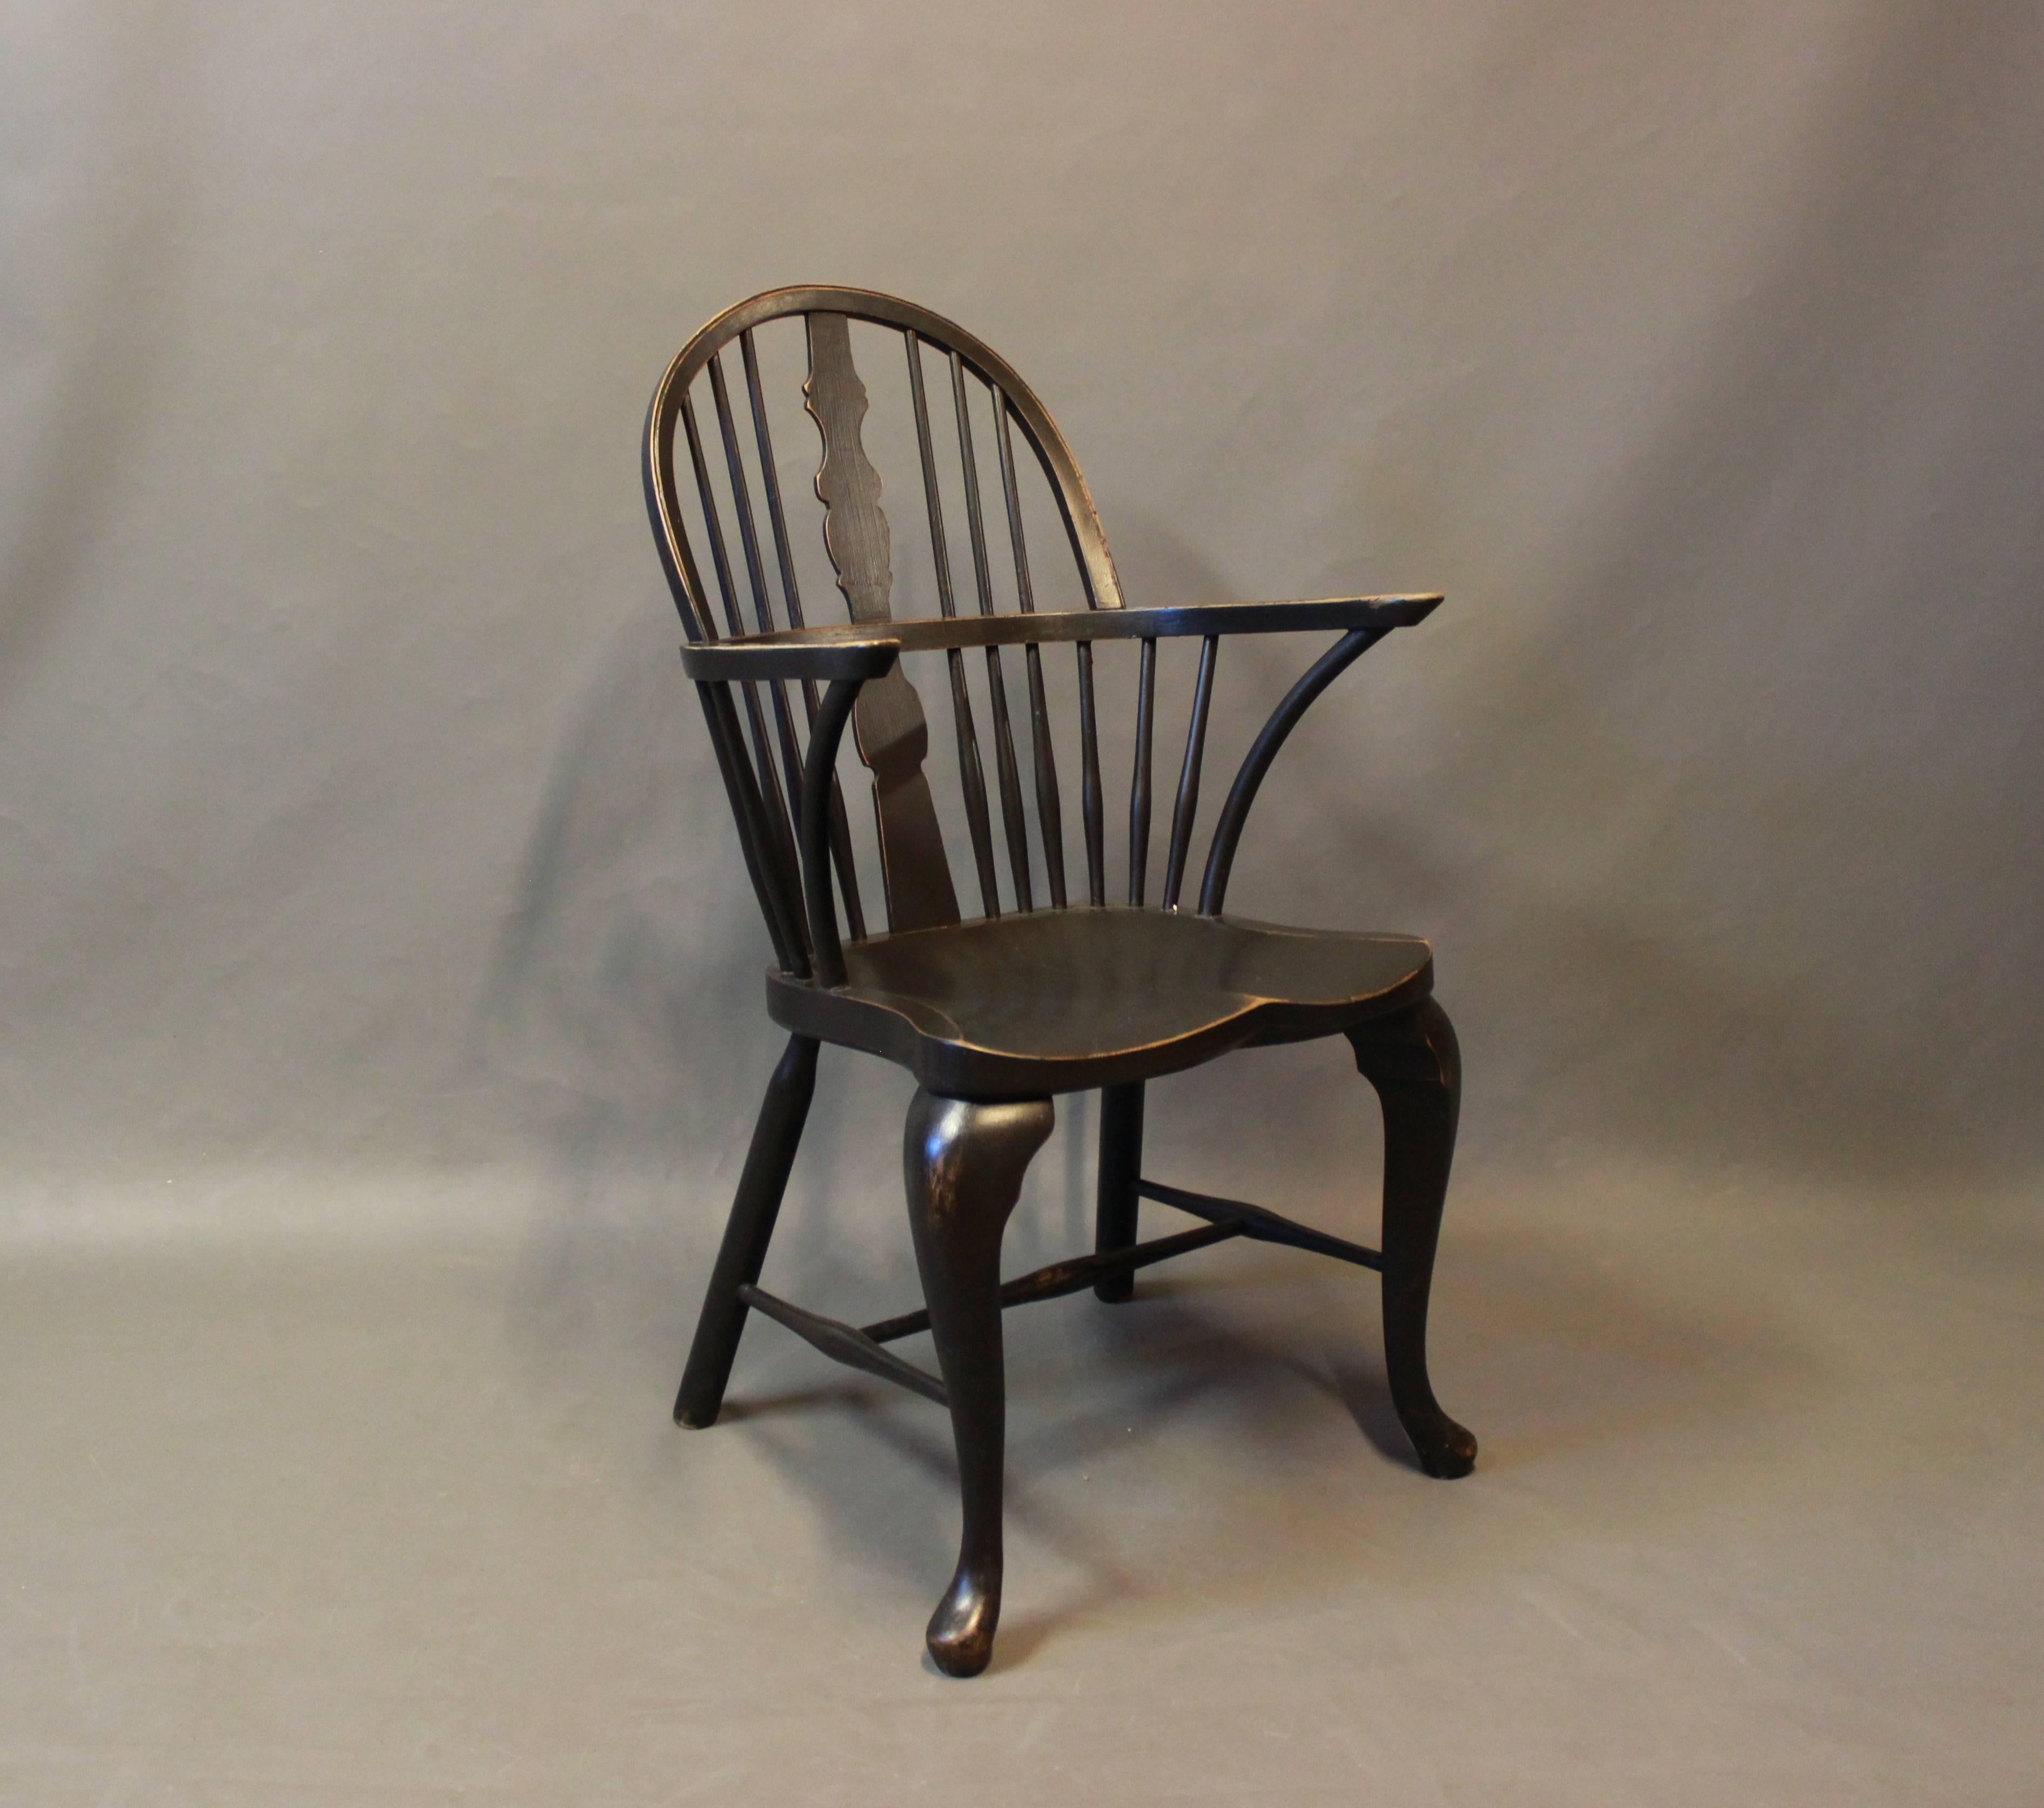 A pair of black painted windsor armchairs in wood from the 1880s. The chairs are in great vintage condition.